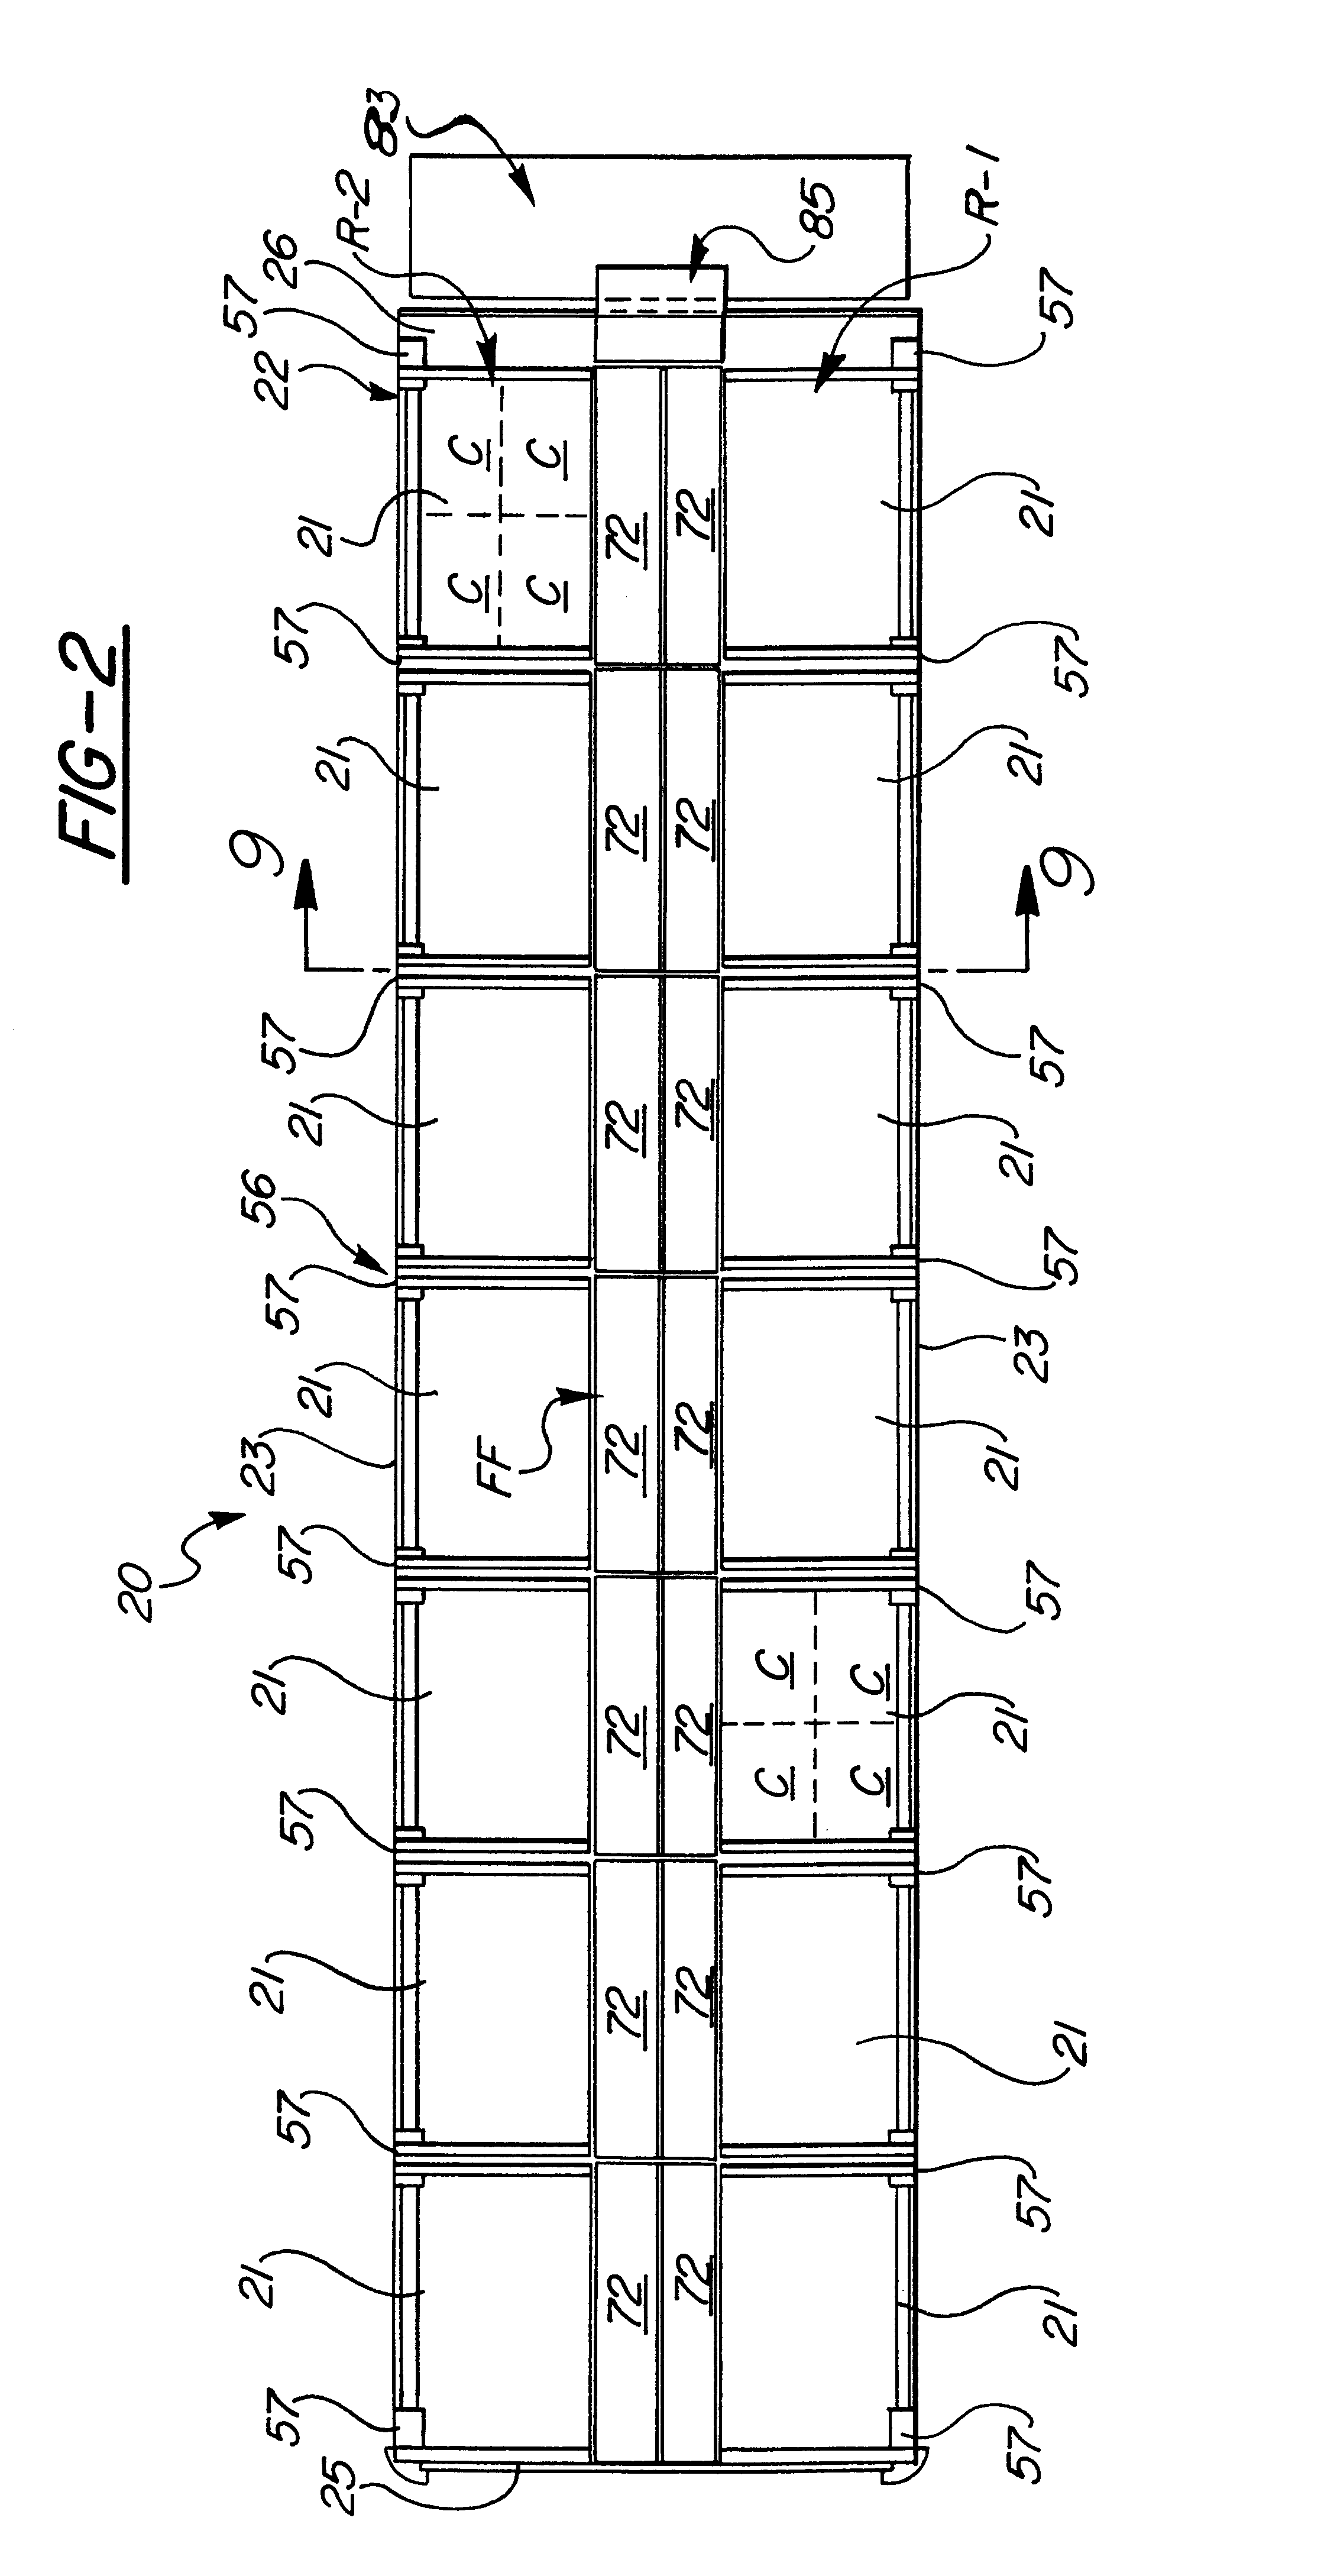 Beverage transport cart system and method of its manufacture and operation